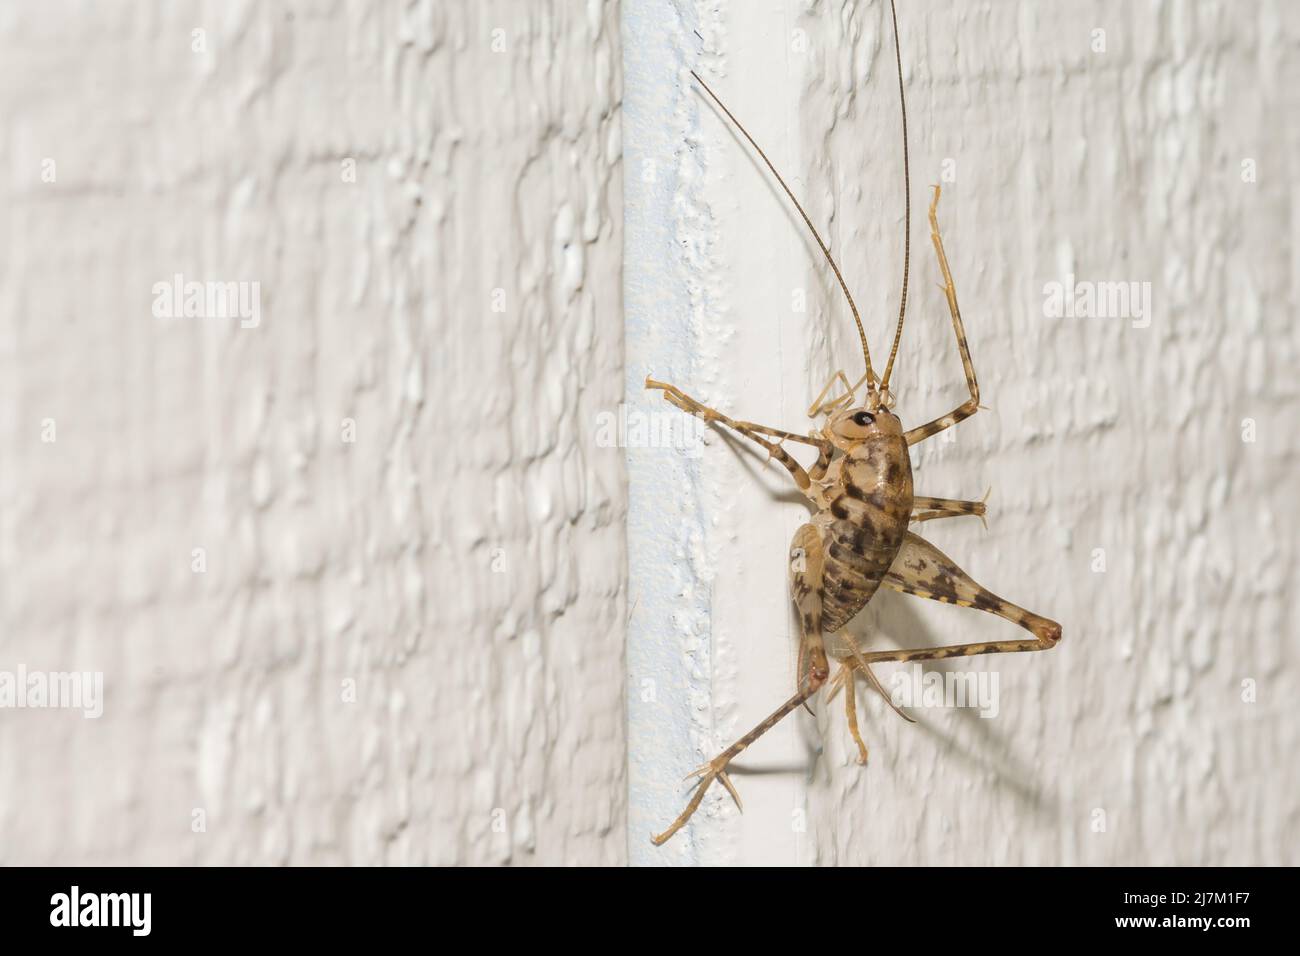 A close up of a Camel Cricket climbing the wall in a basement. Stock Photo